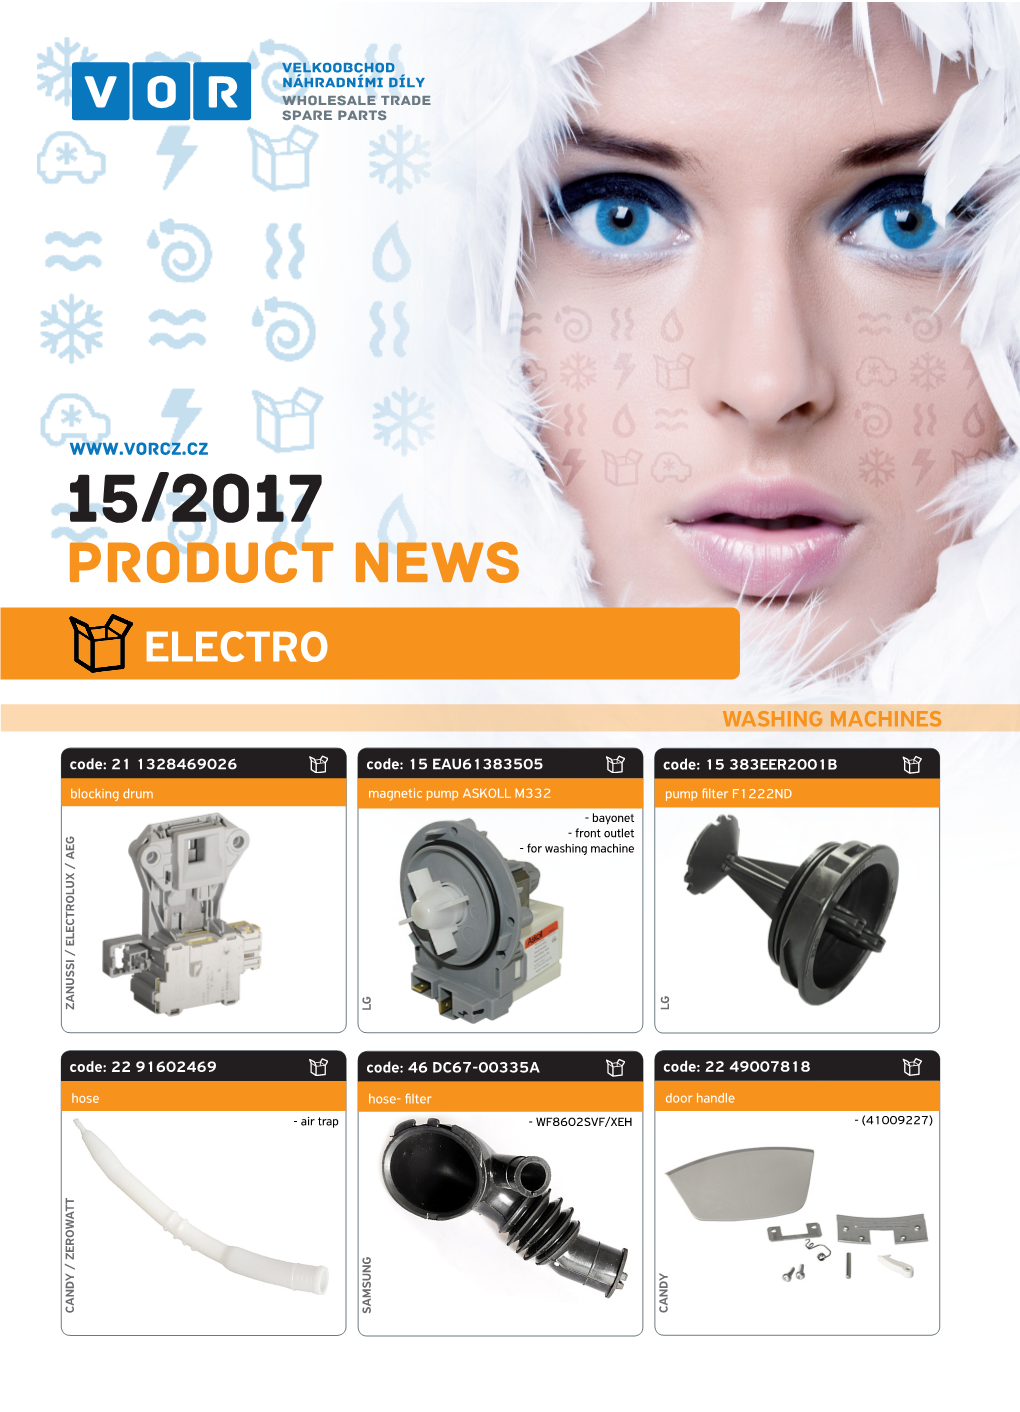 Product News ELECTRO